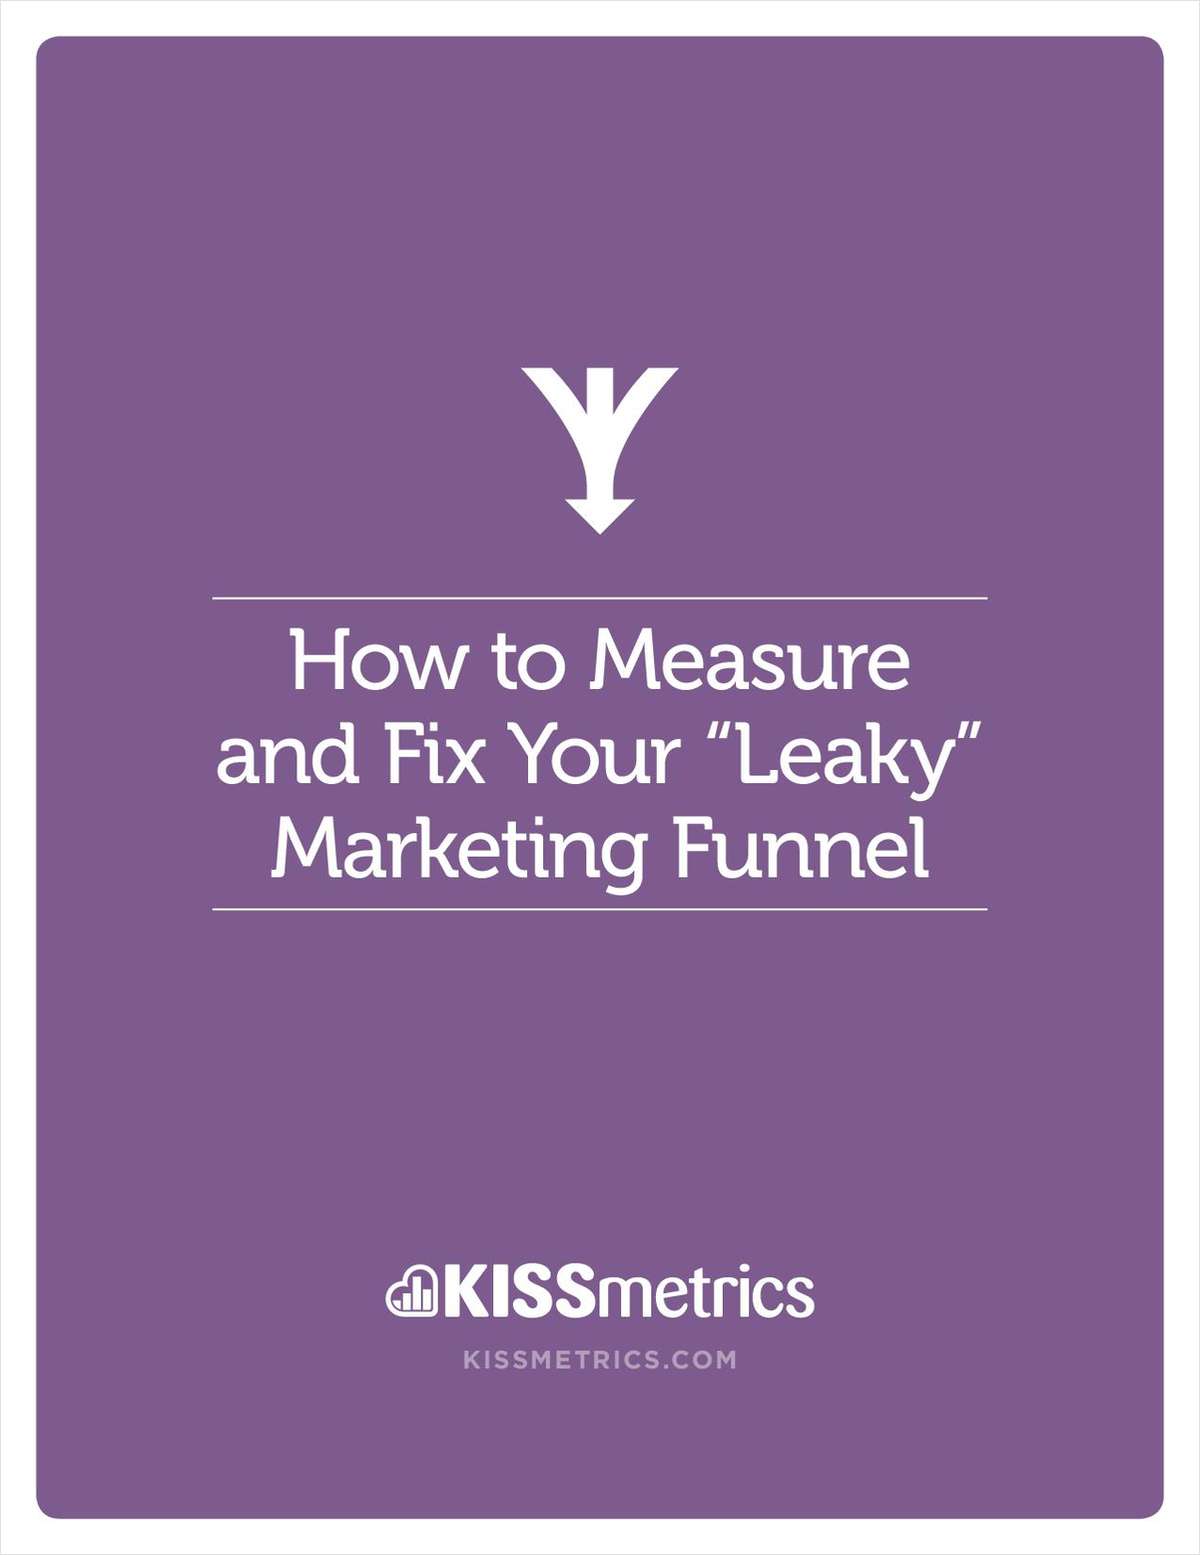 How to Measure and Fix Your 'Leaky' Marketing Funnel